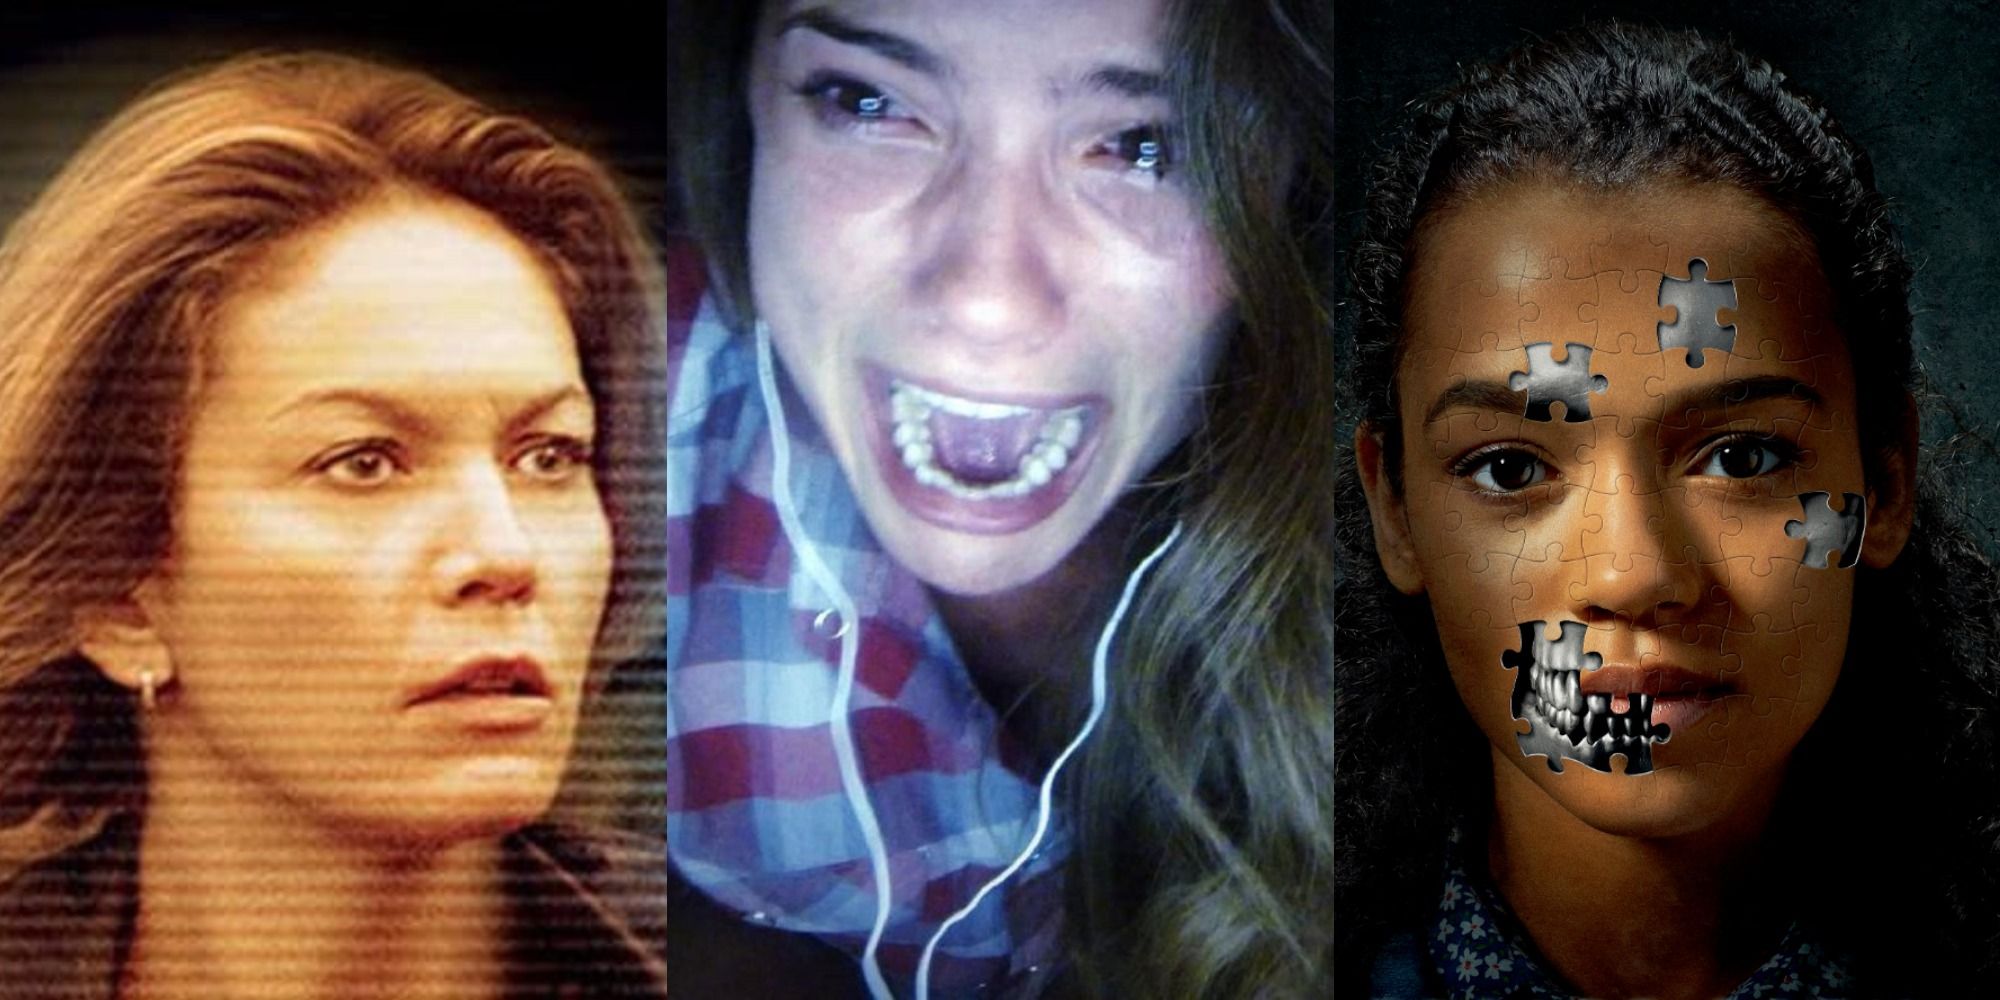 A collage of the faces of the main characters from the posters for Untraceable, Unfriended and Escape Room